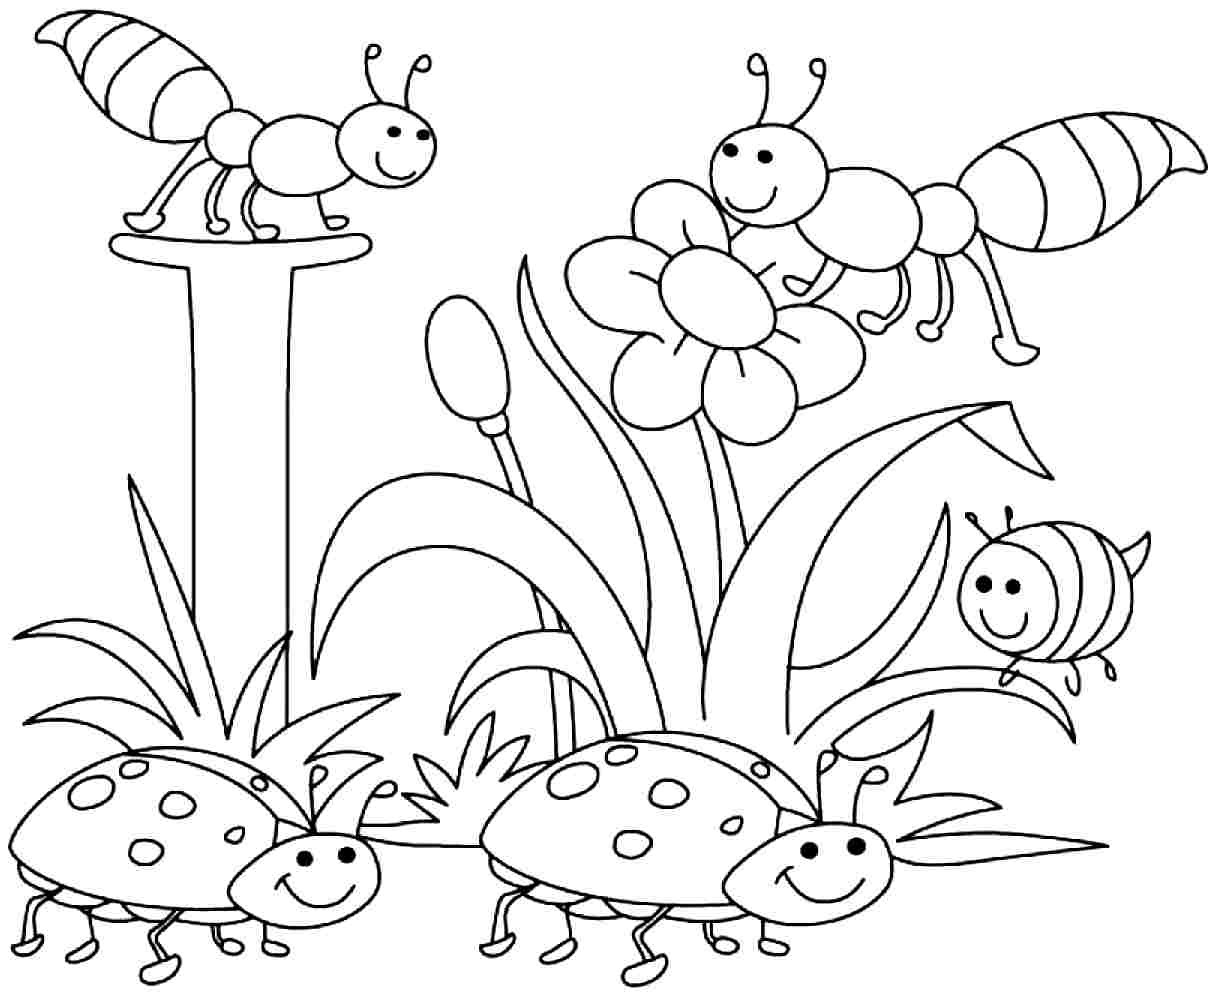 Spring Coloring Sheets For Kids
 5 Best of Spring Season Coloring Pages Printable